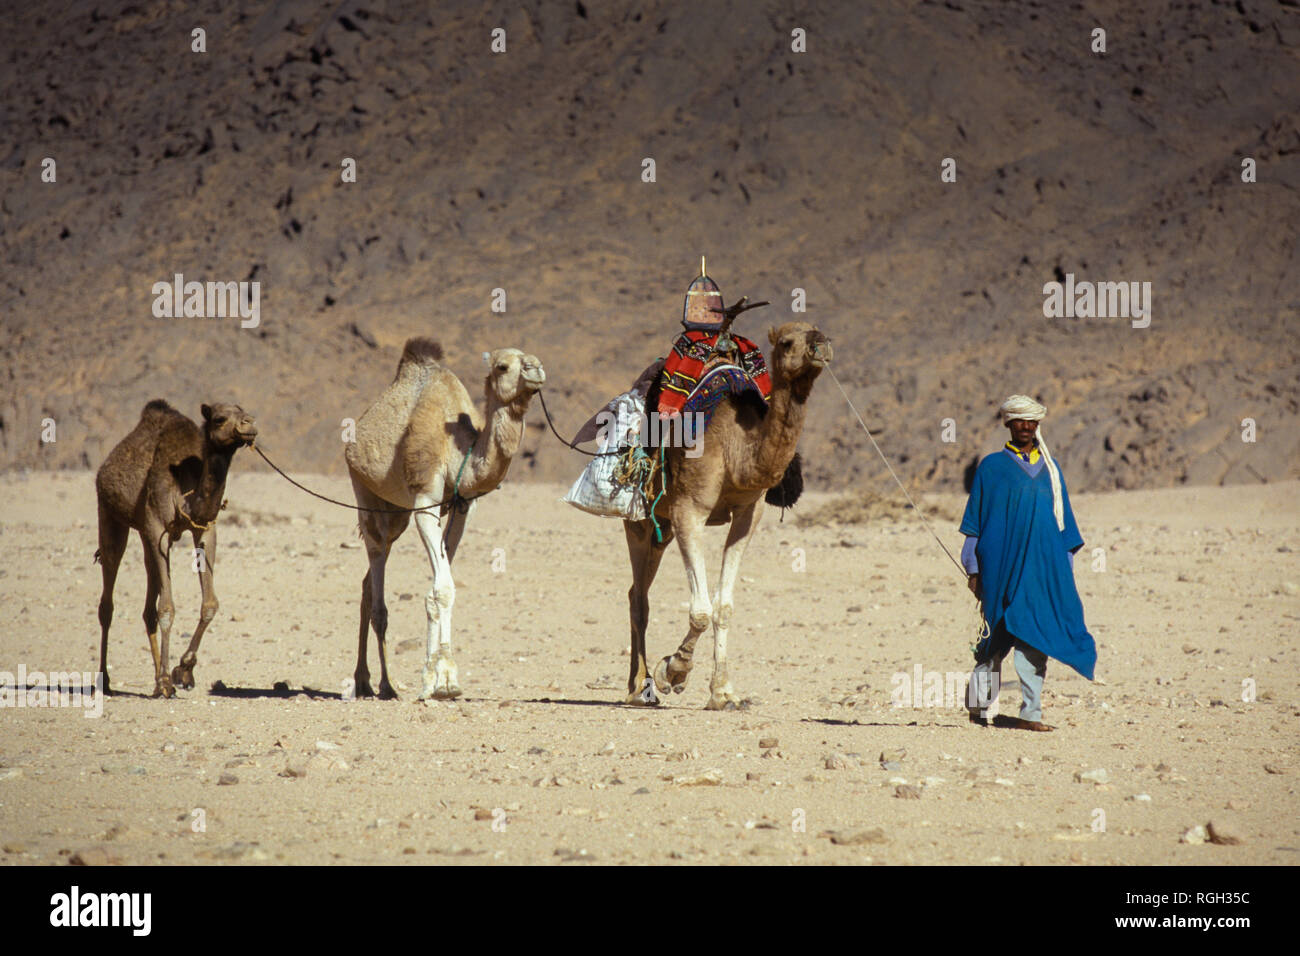 TIMIMOUN, ALGERIA - JANUARY 18, 2002: Unknown populations of the Touareg tribe with their camels cross the Acacus desert Stock Photo